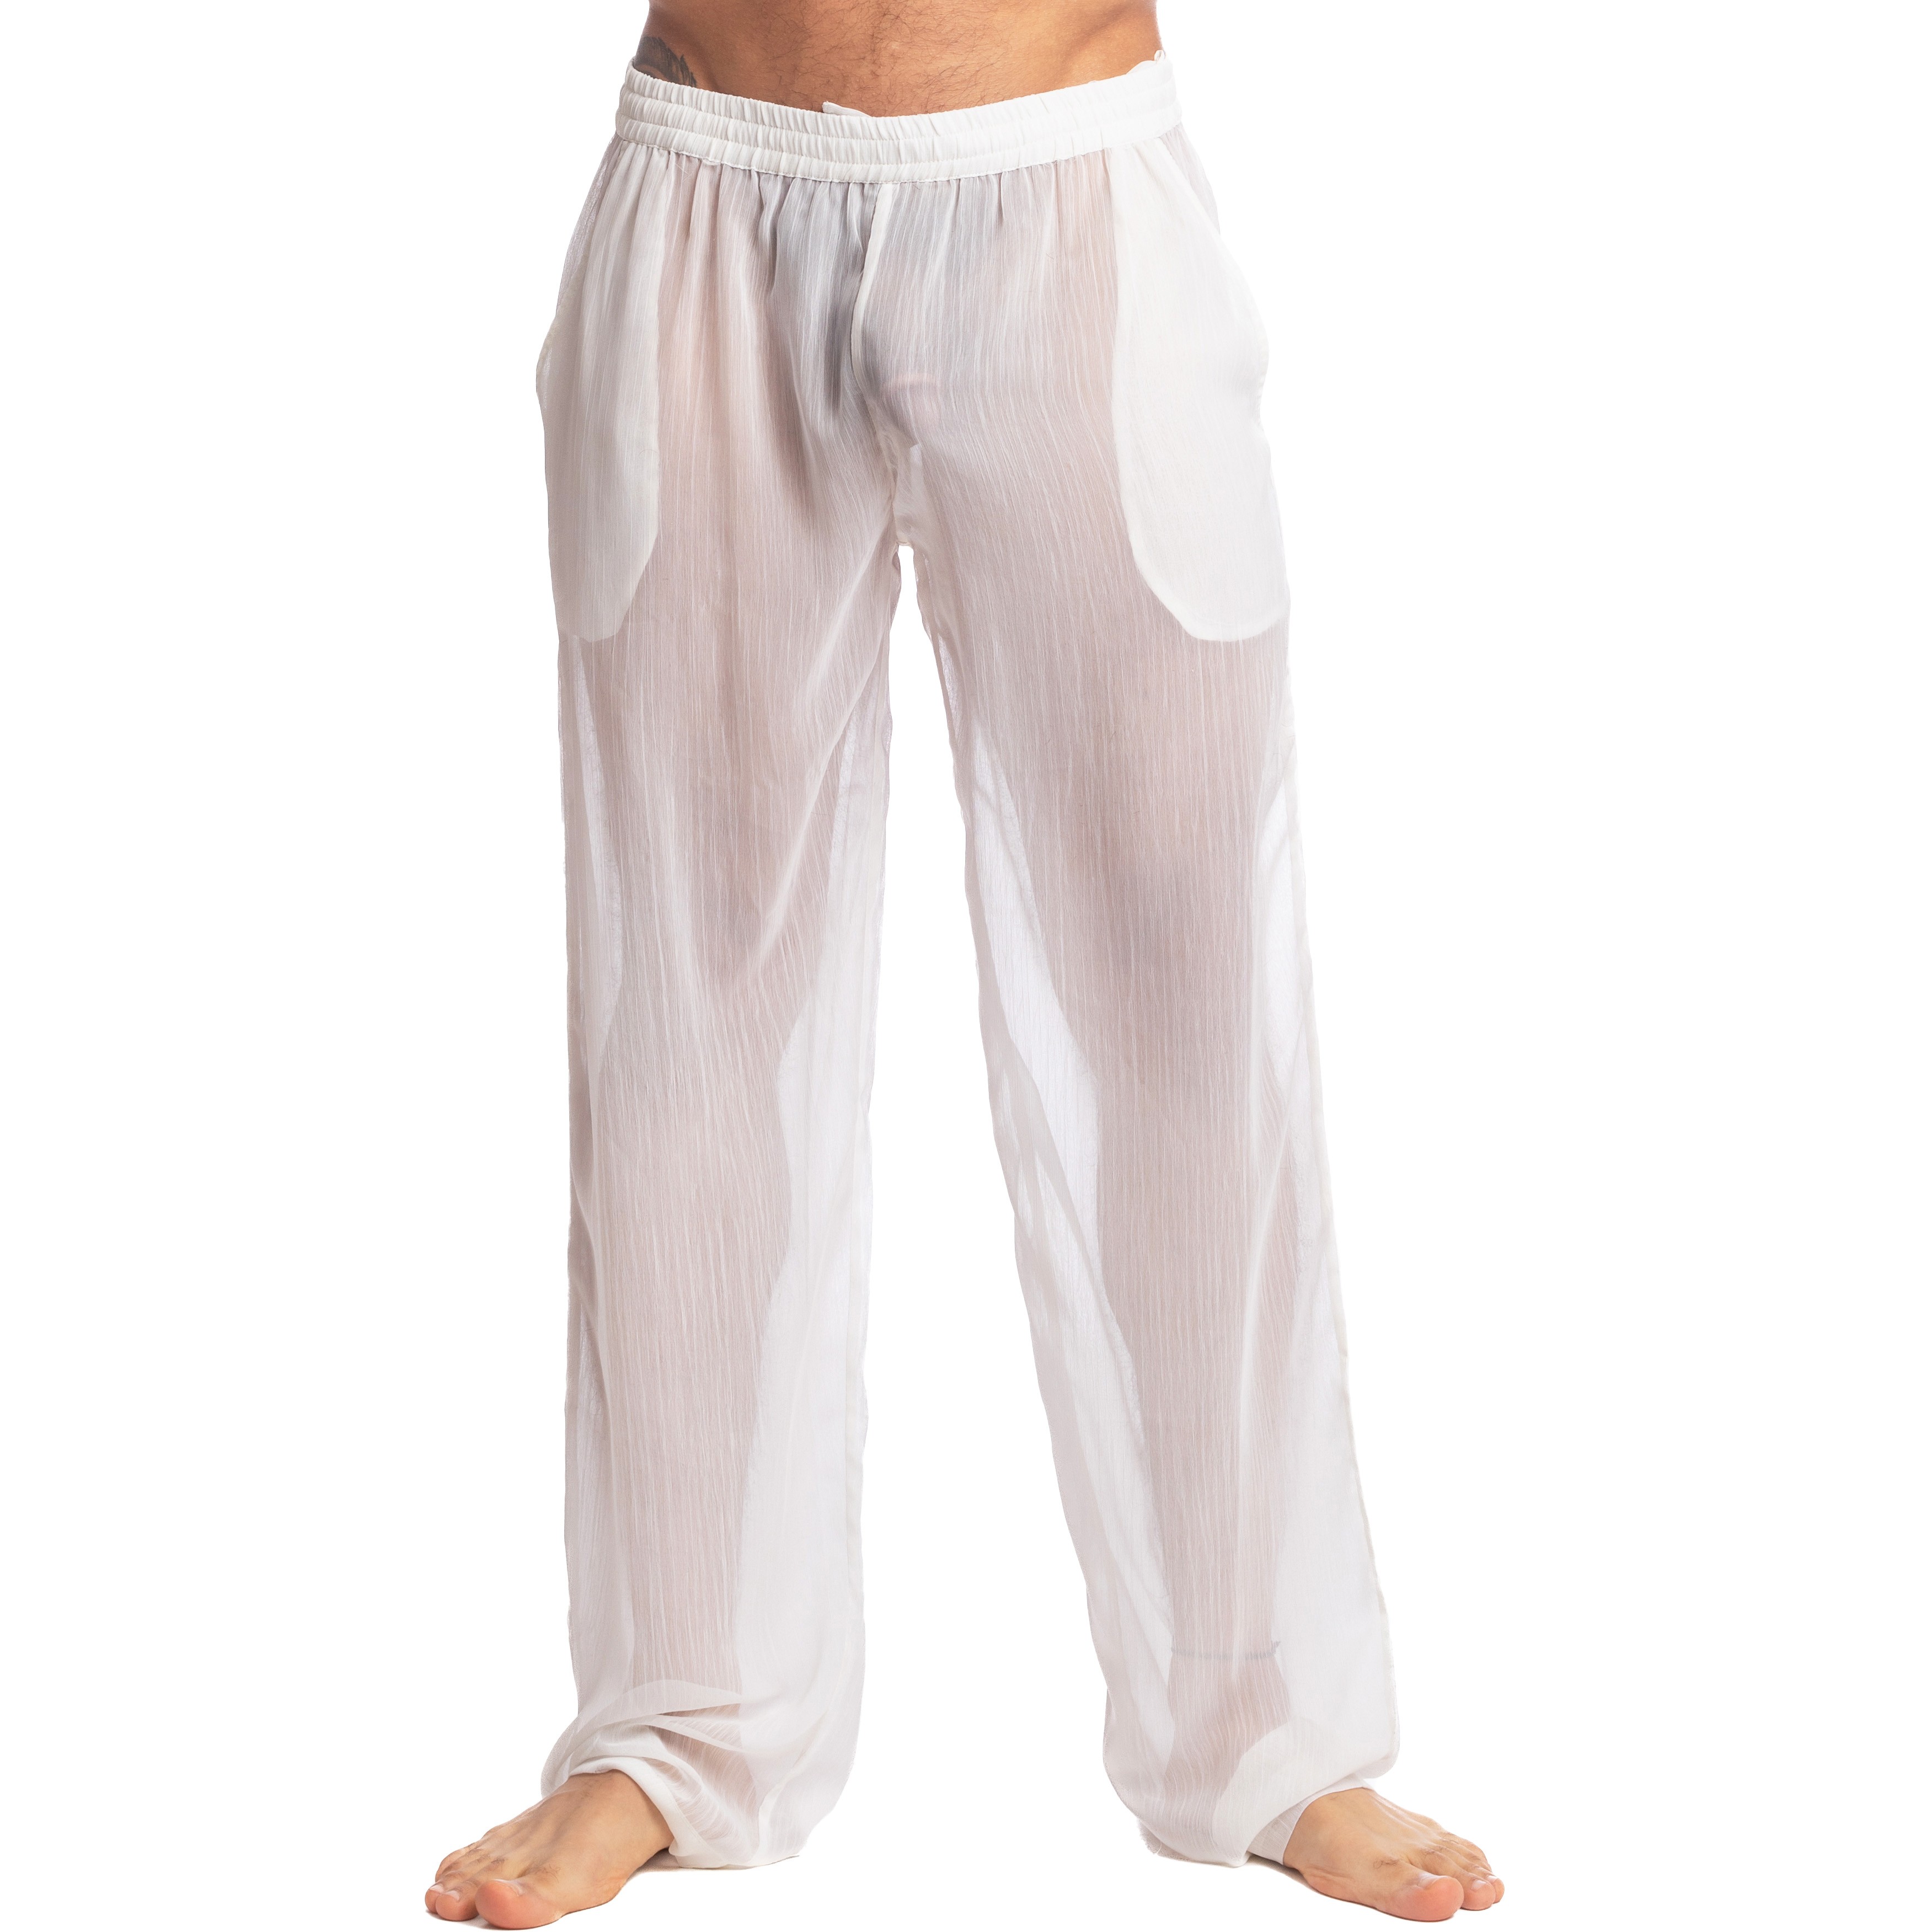 Chantilly - White transparent trousers - L'Homme Invisible : sale o